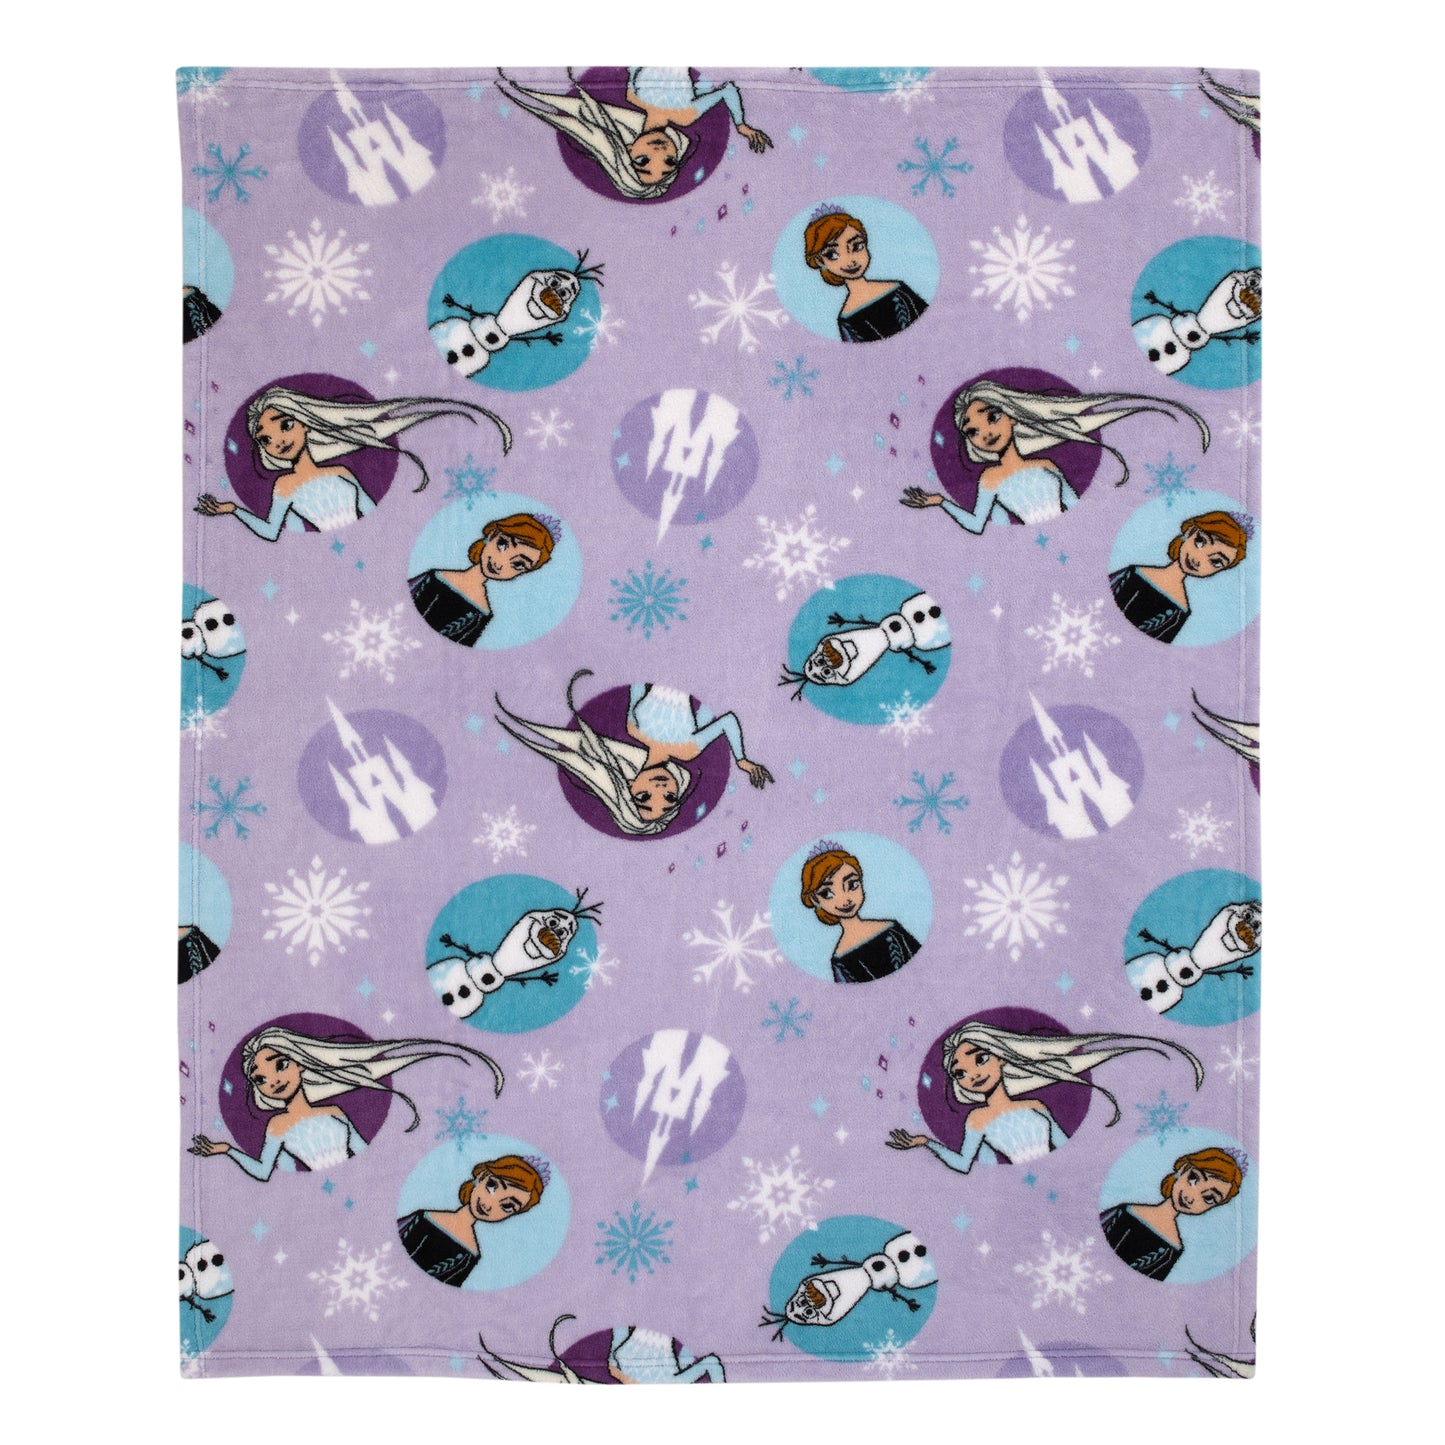 Disney Frozen Winter Cheer Lavender, Aqua, Green and White, Anna, Elsa and Olaf Toddler Blanket